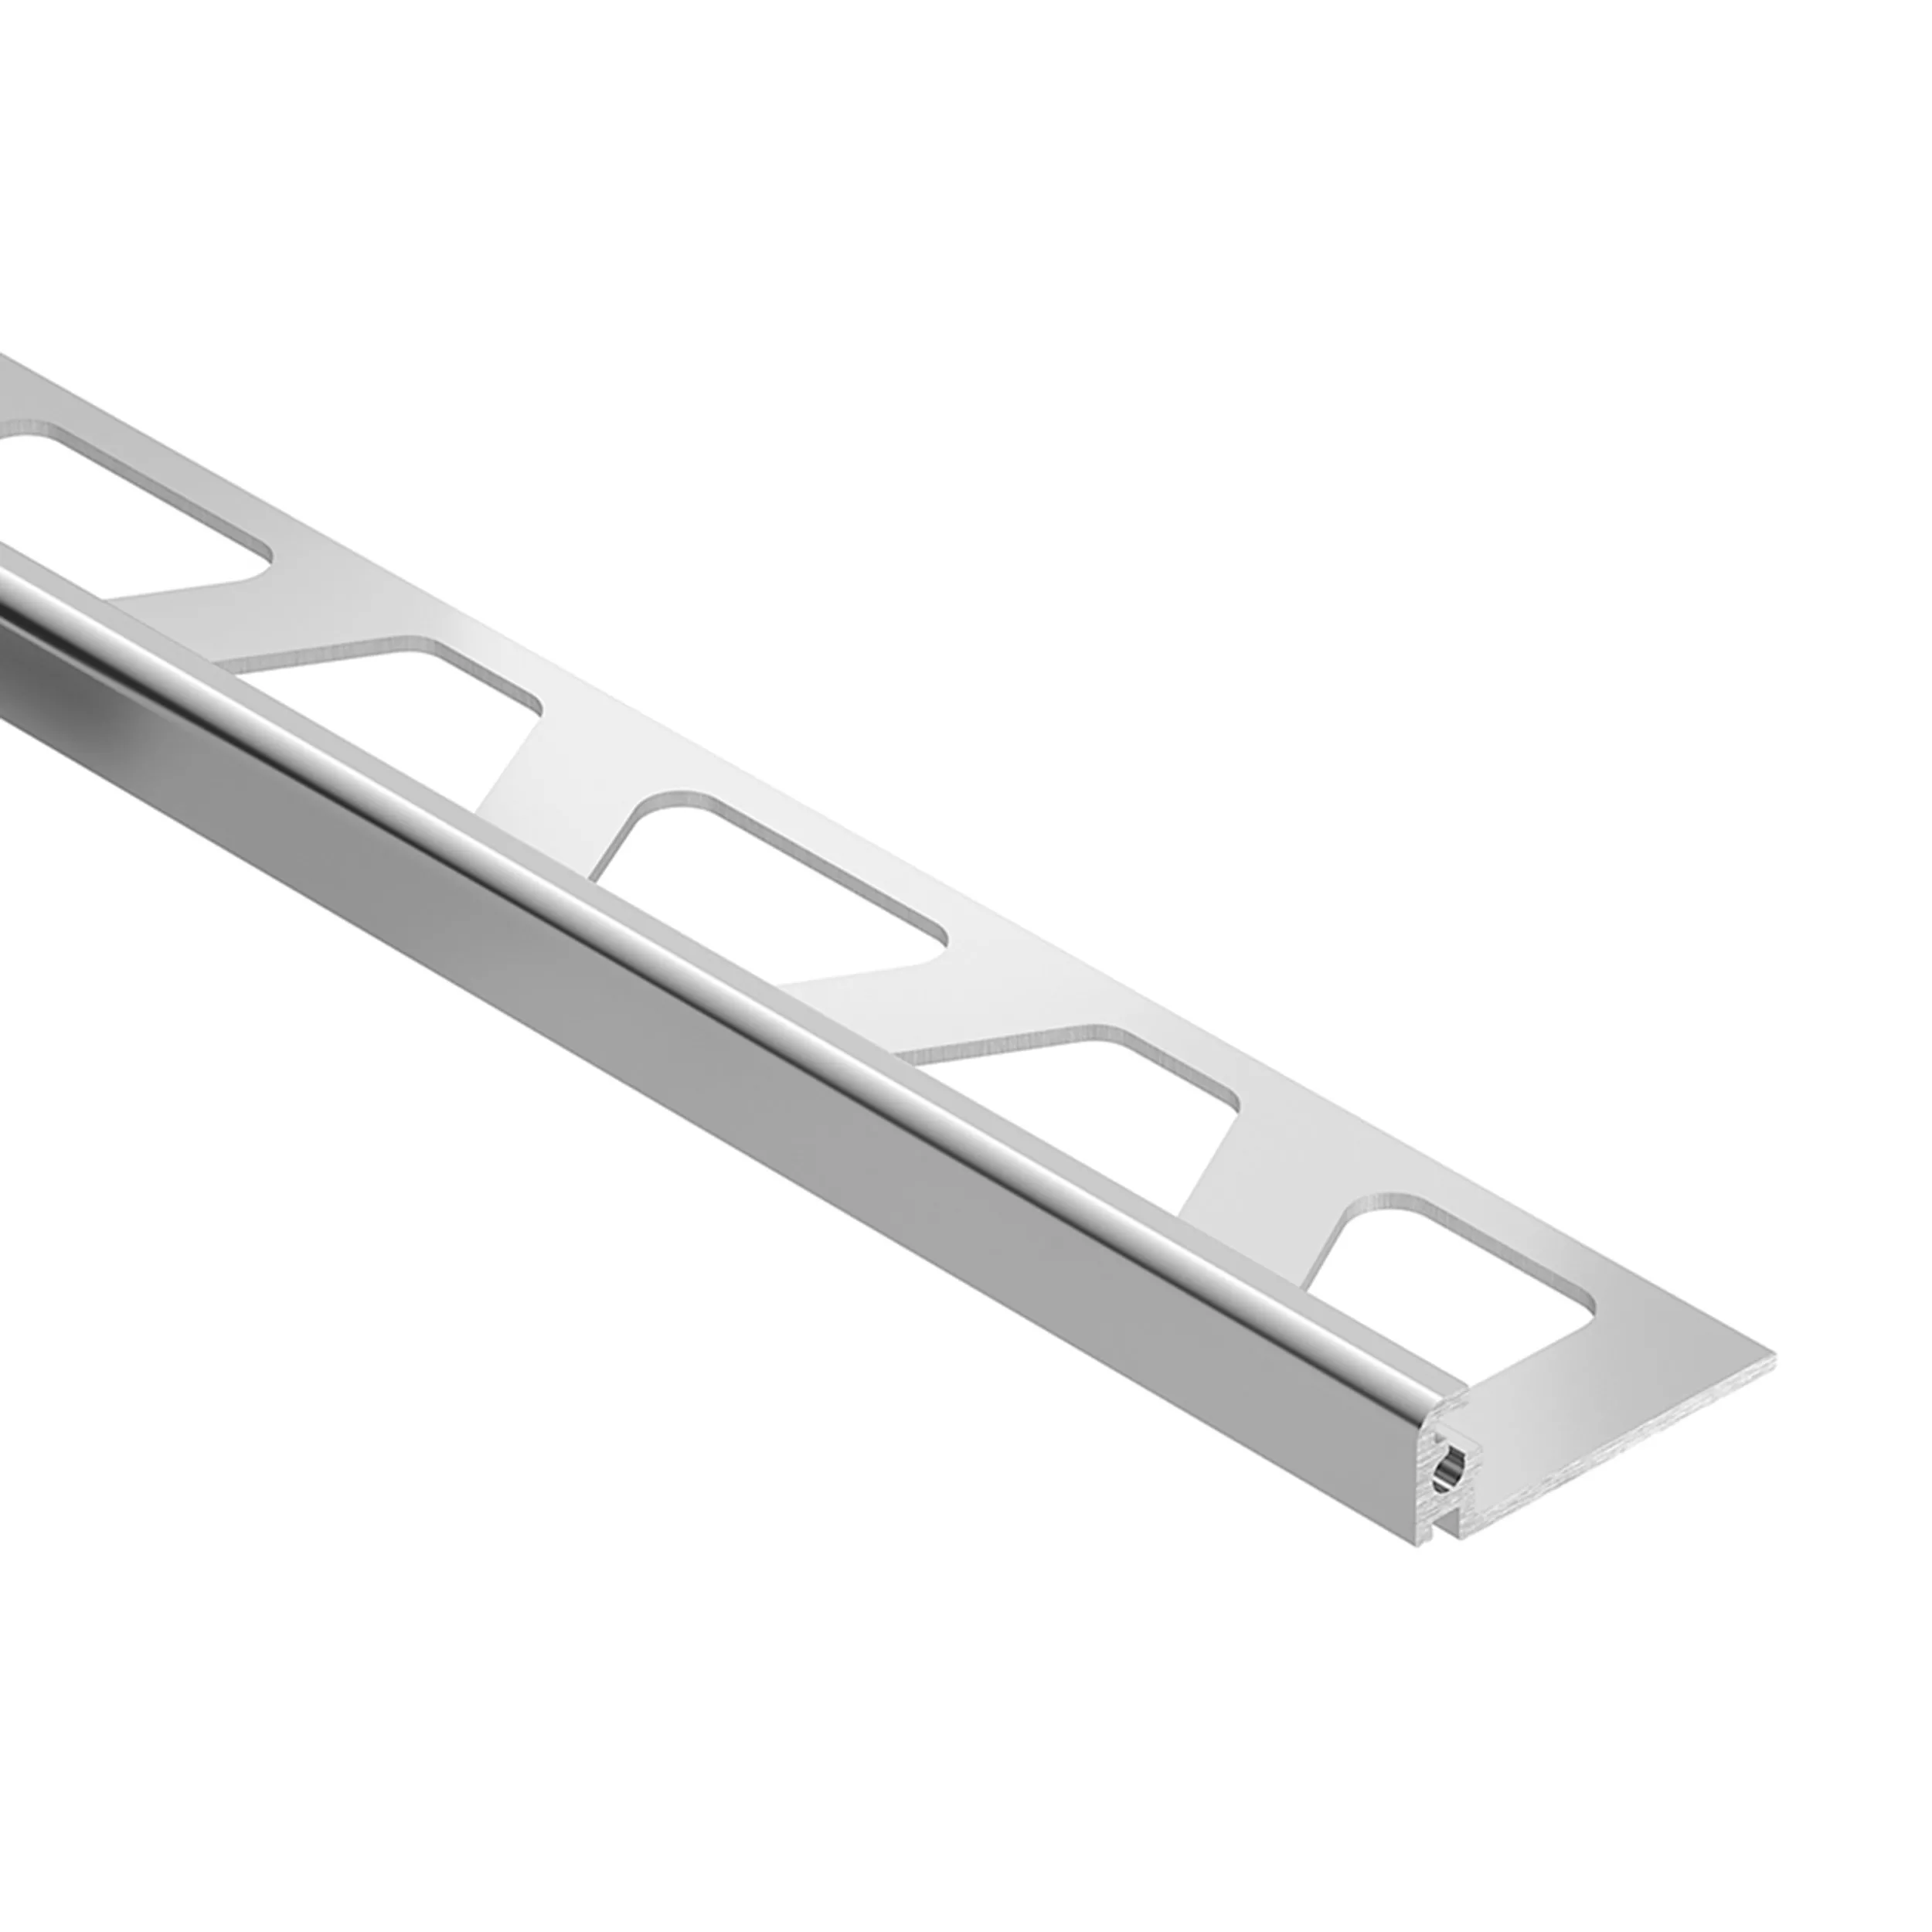 Schluter Jolly Edge Trim 5/16in. Anodized Aluminum Polished Chrome